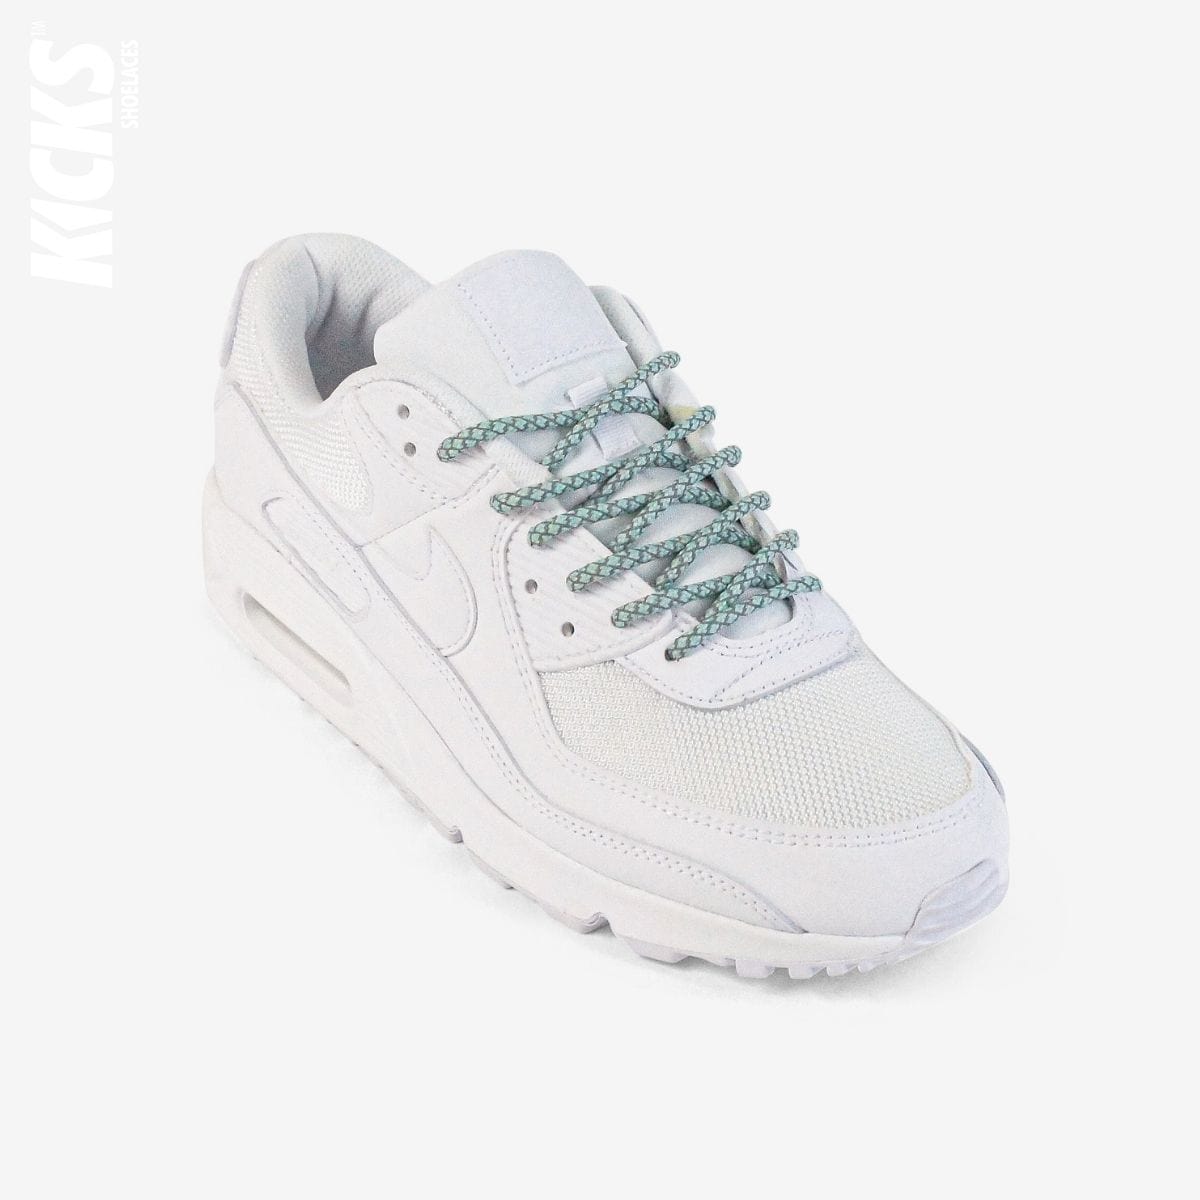 rope-laces-on-white-sneakers-with-kids-pastel-green-shoelaces